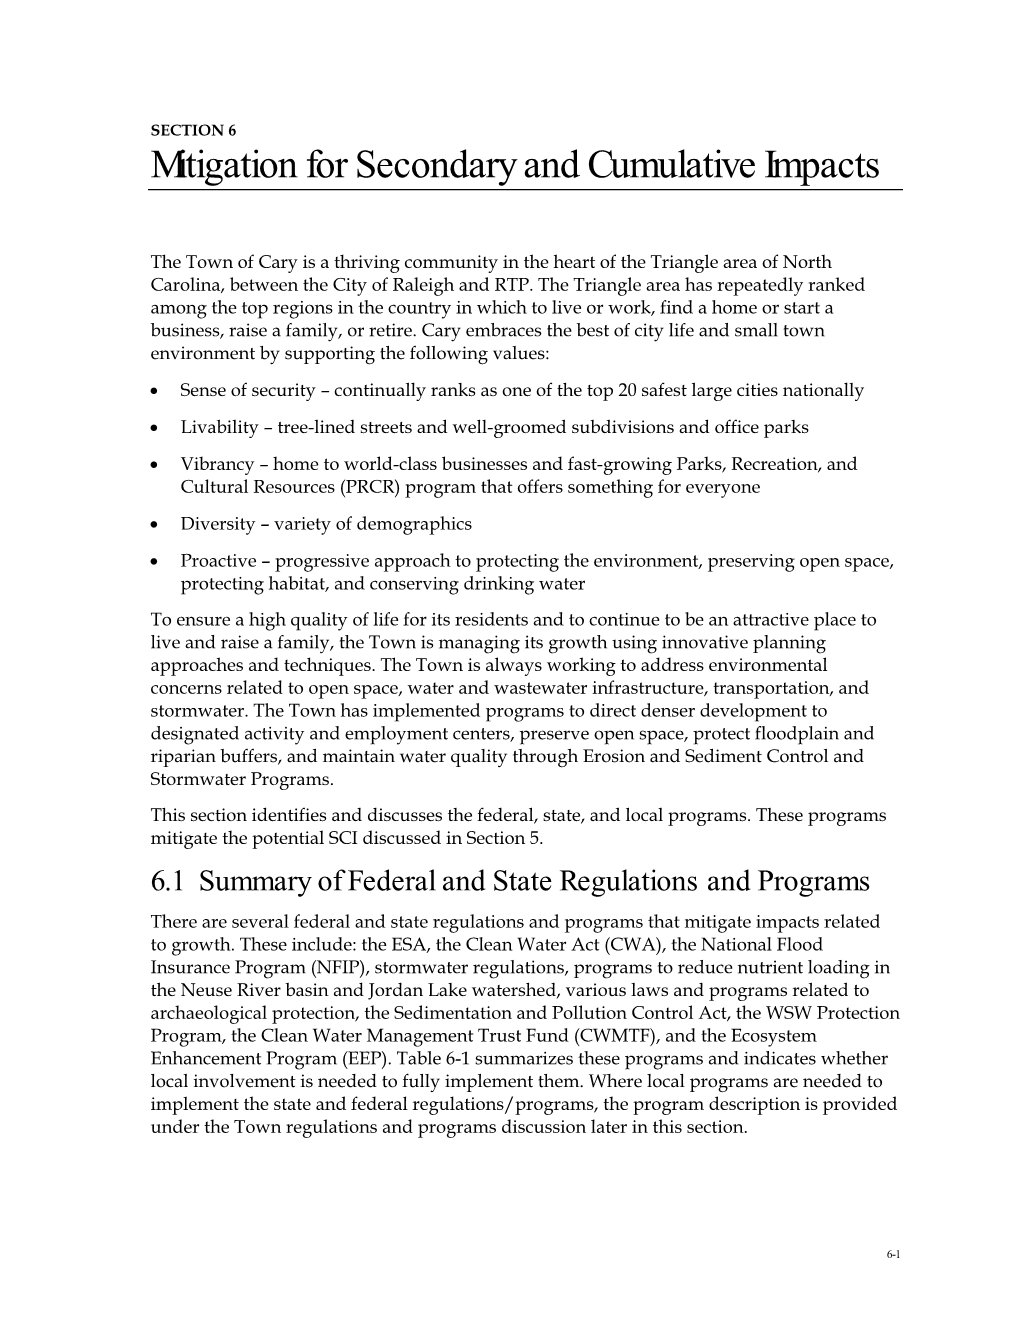 Mitigation for Secondary and Cumulative Impacts